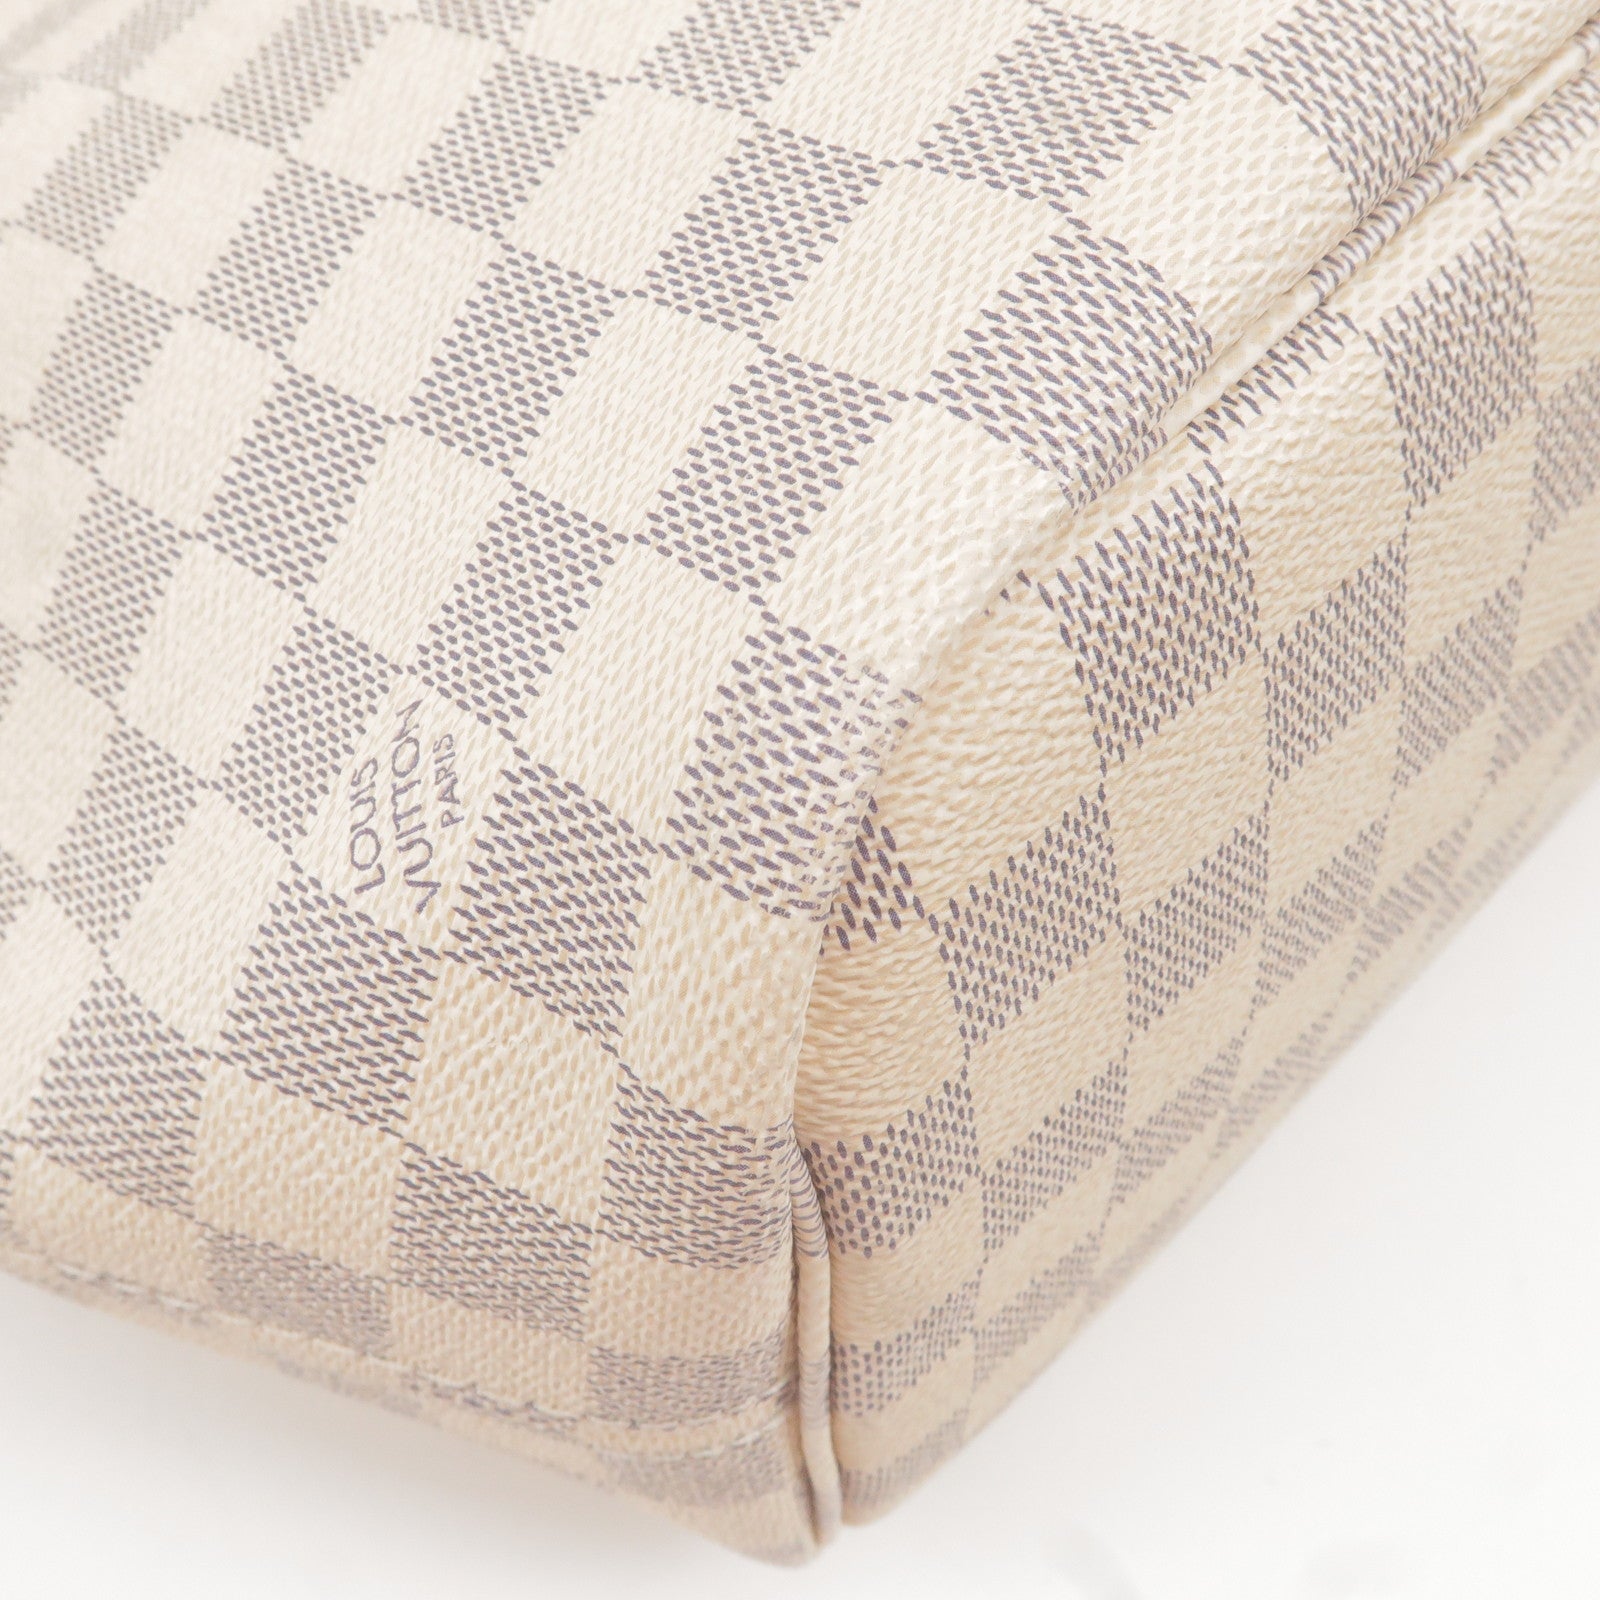 Louis Vuitton Damier Azur Canvas Neverfull MM N41605 Rose Ballerine :  Clothing, Shoes & Jewelry - .com